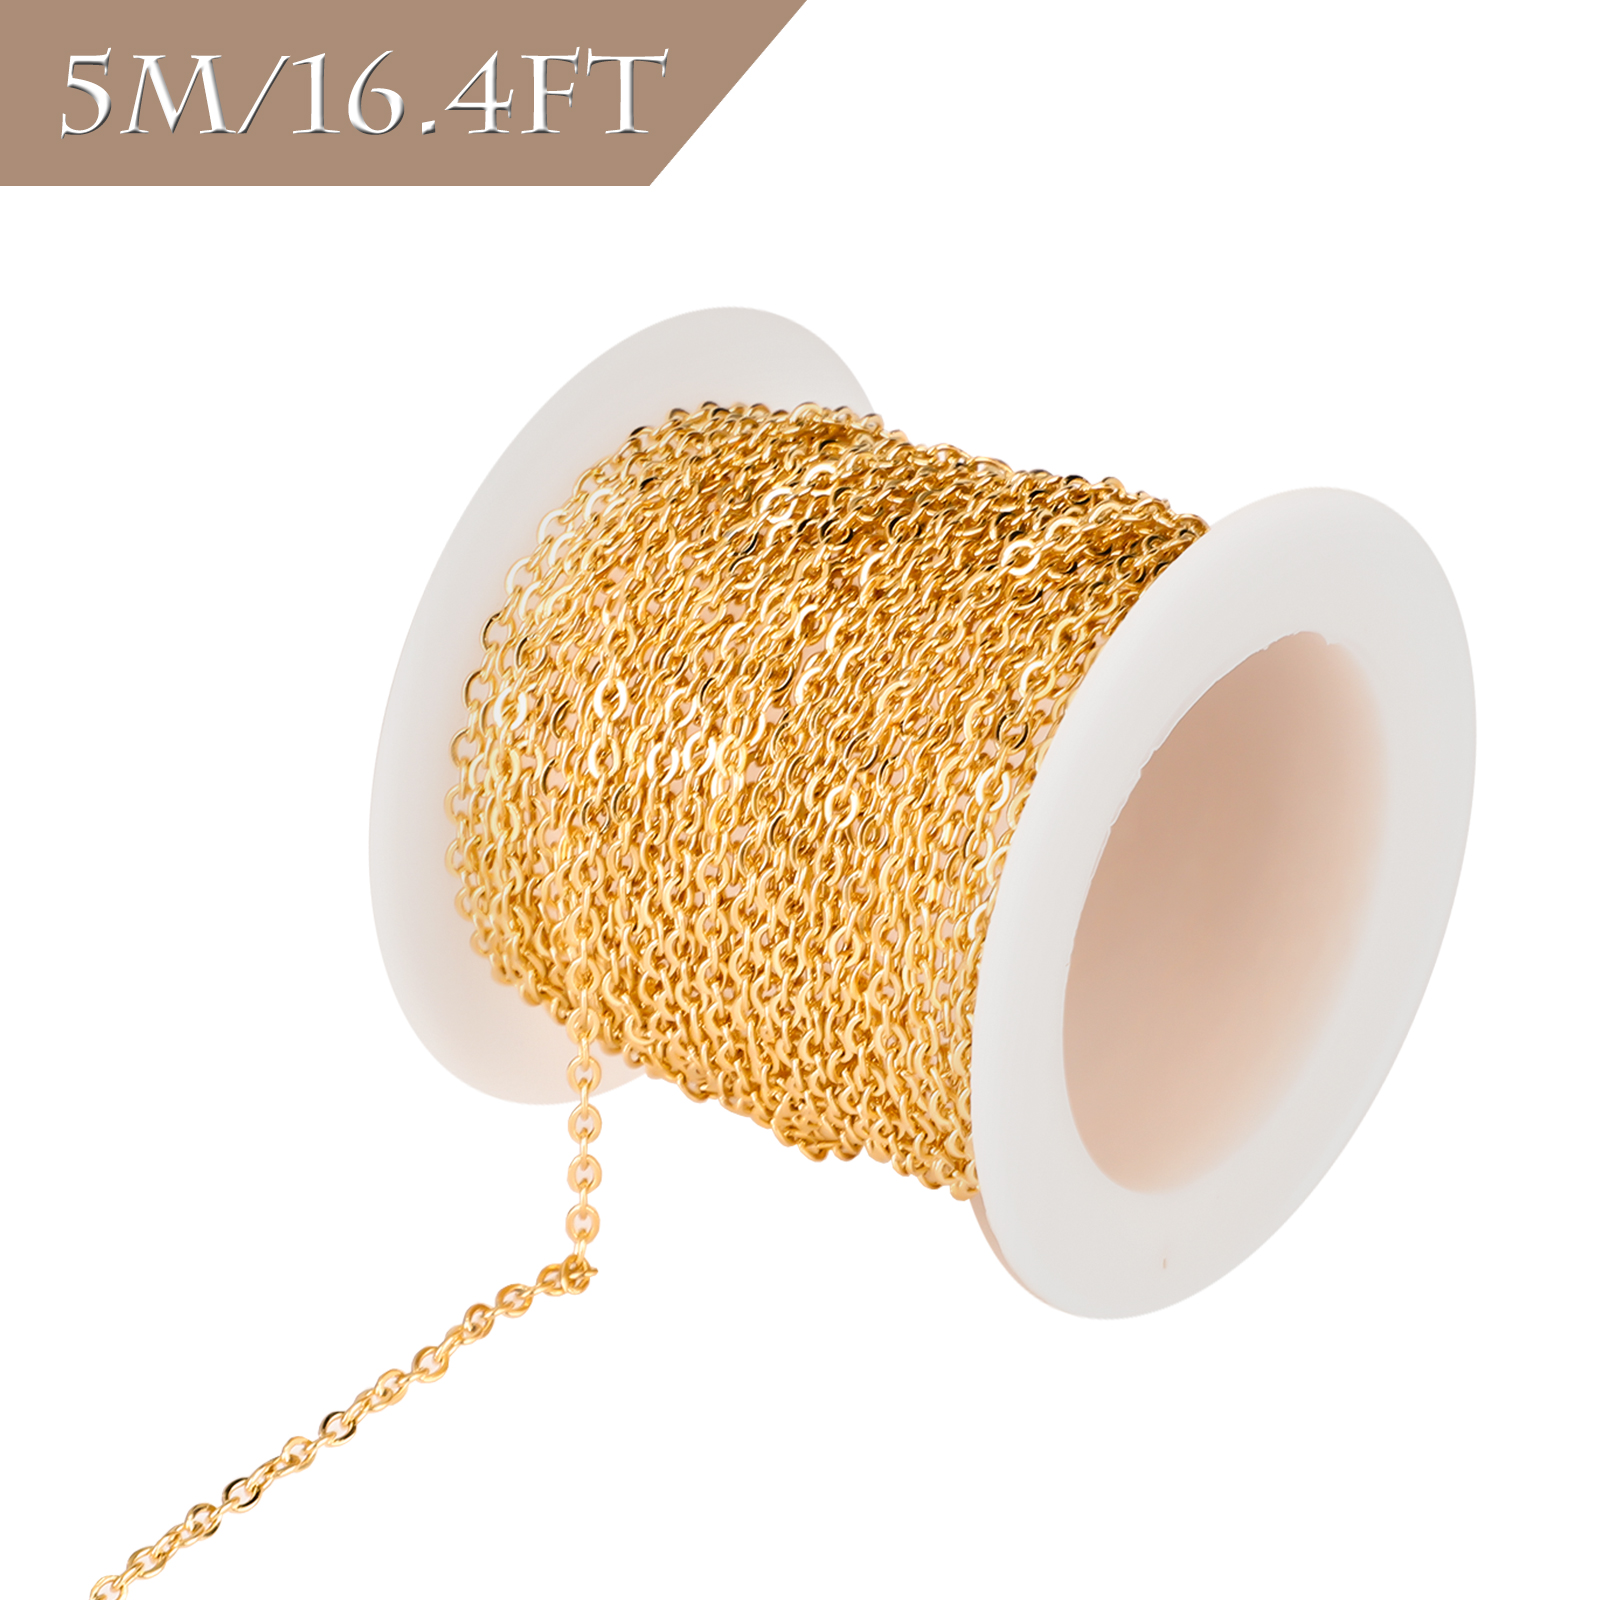 Color:Gold 1PCS:5m/16.4ft Stainless Steel Jewelry Making Chain Necklace Charm Pendant Link Cable